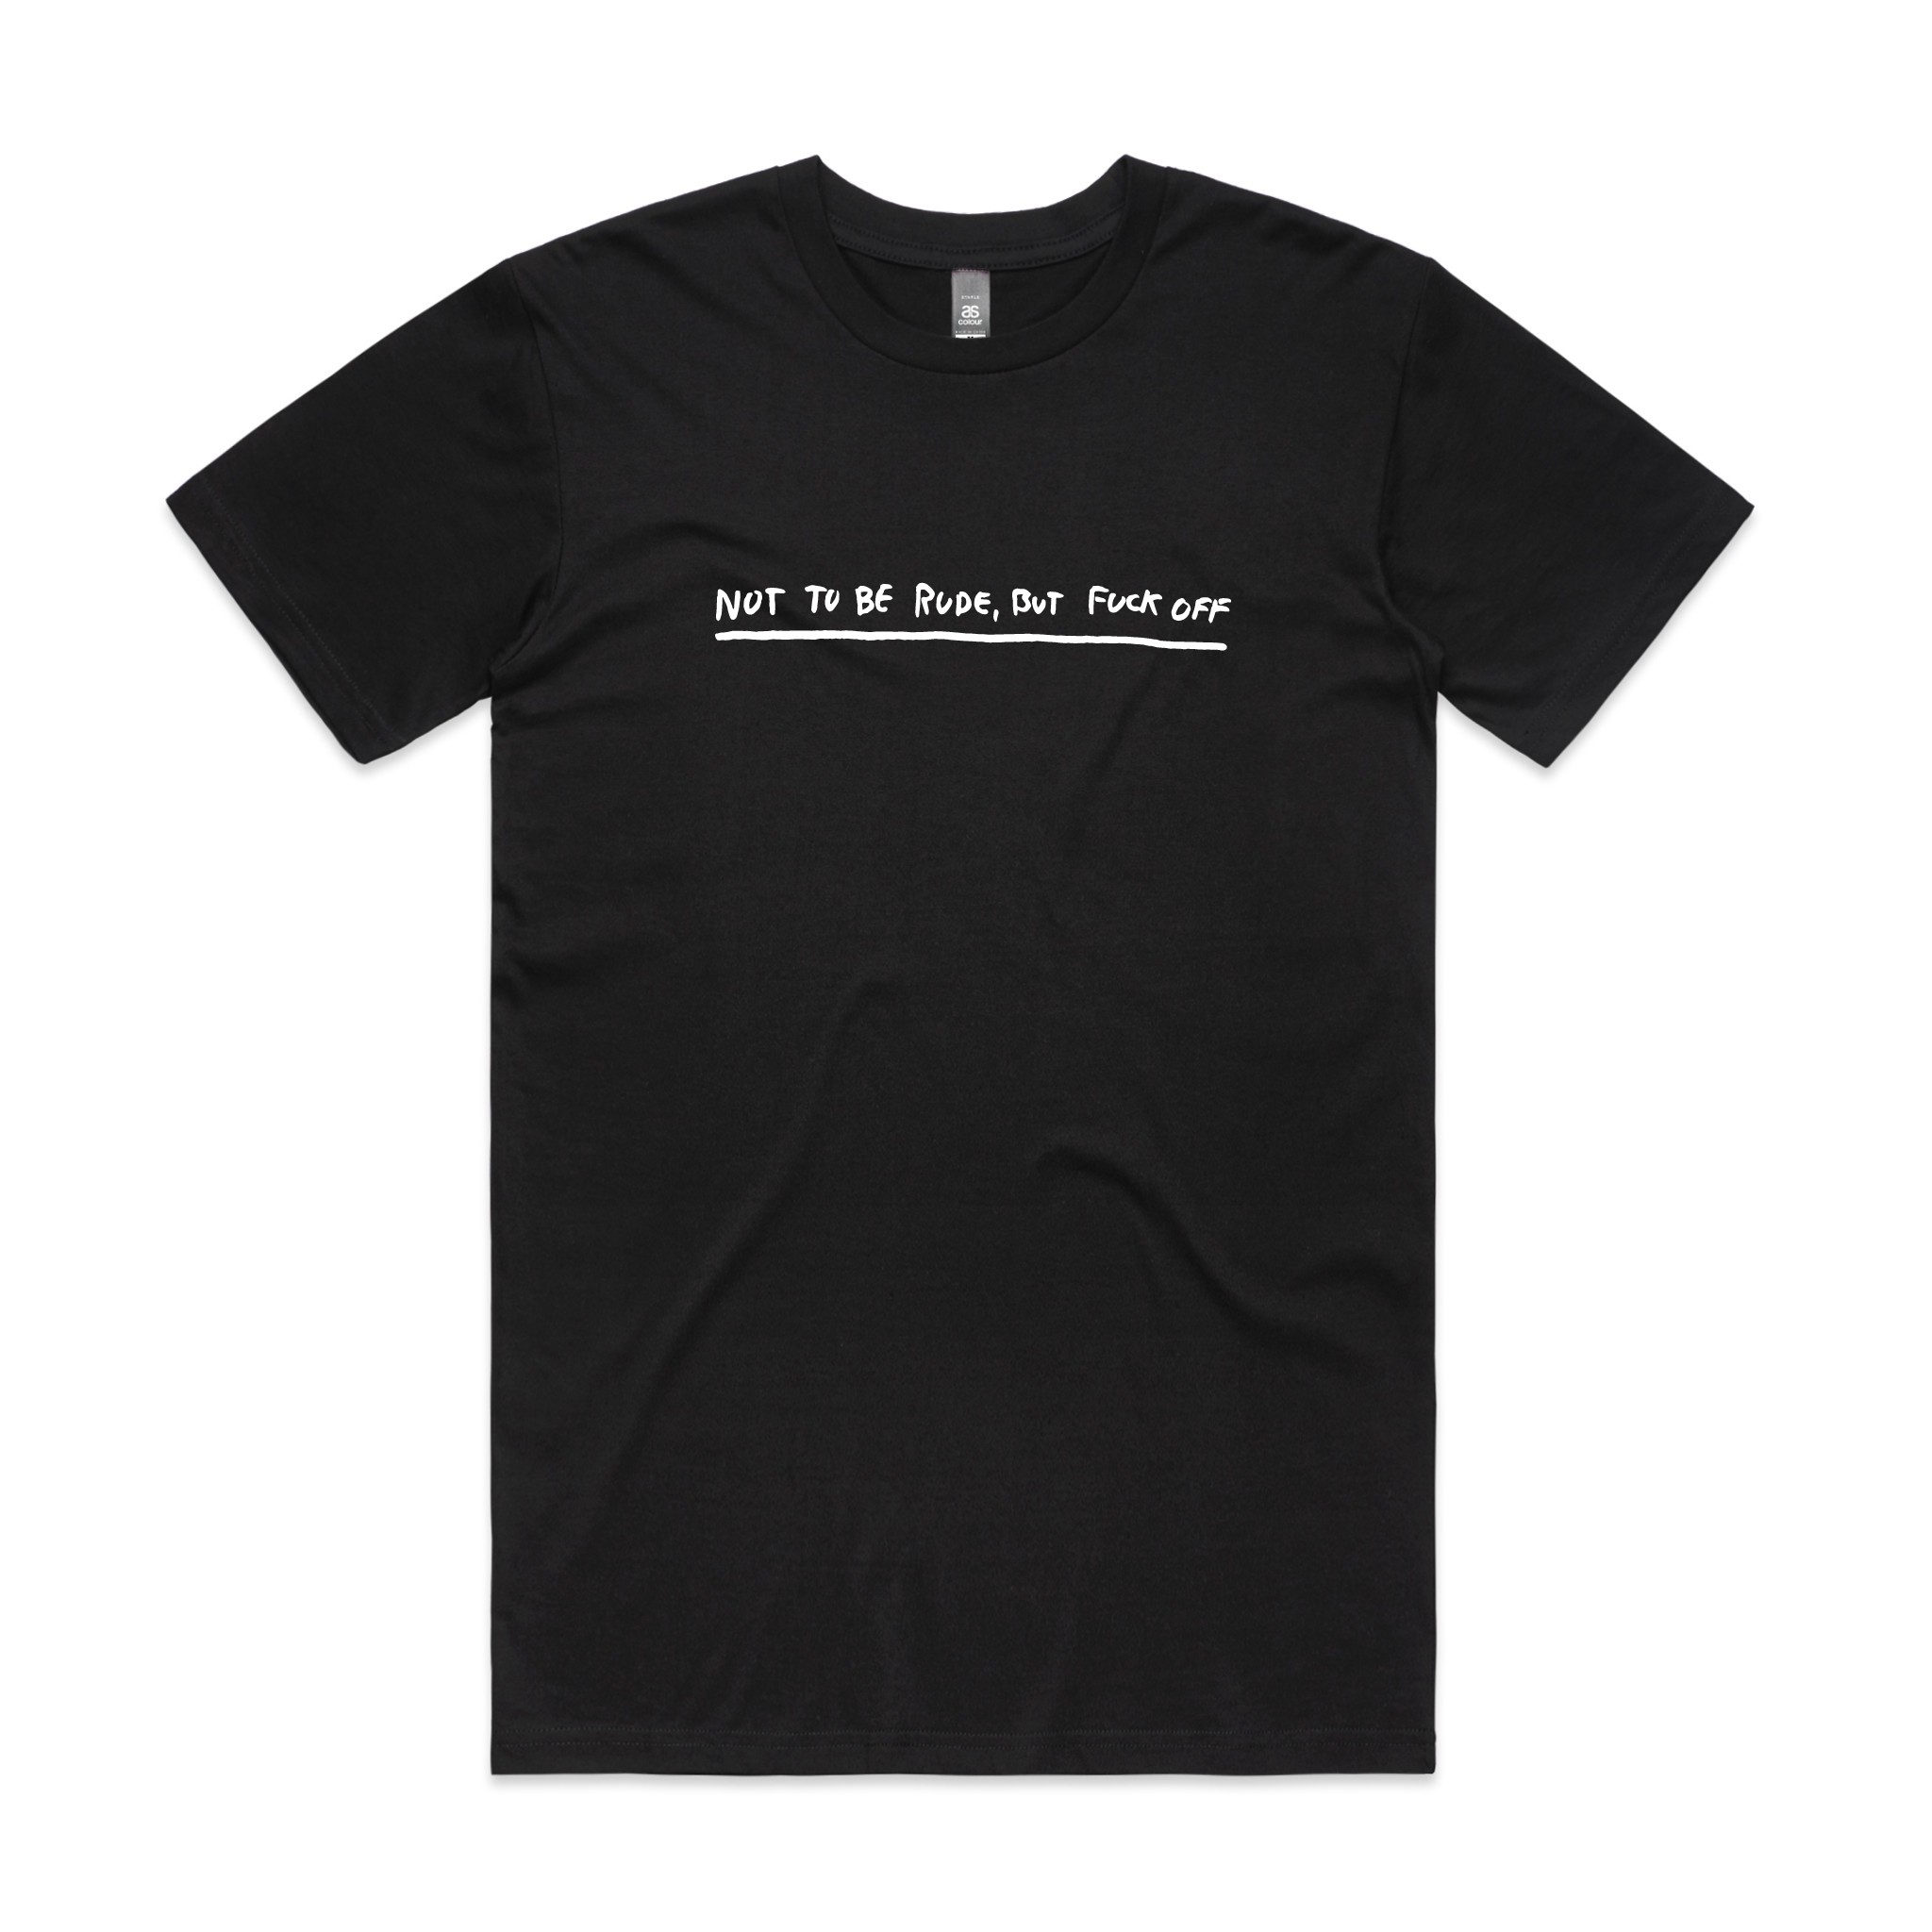 Not To Be Rude Tee